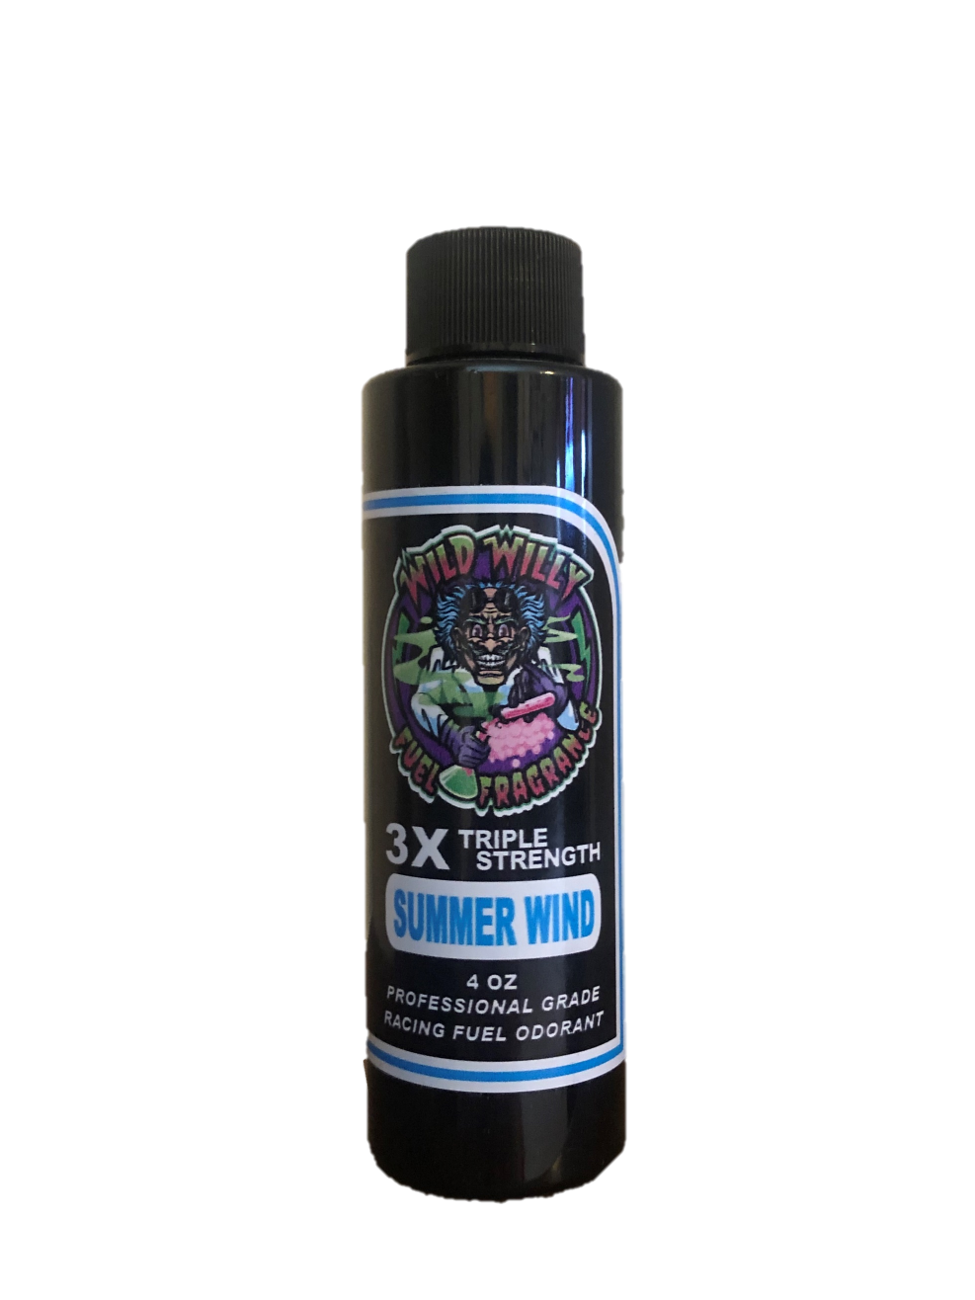 Summer Wind - Wild Willy Fuel Fragrance - 3X Triple Strength!